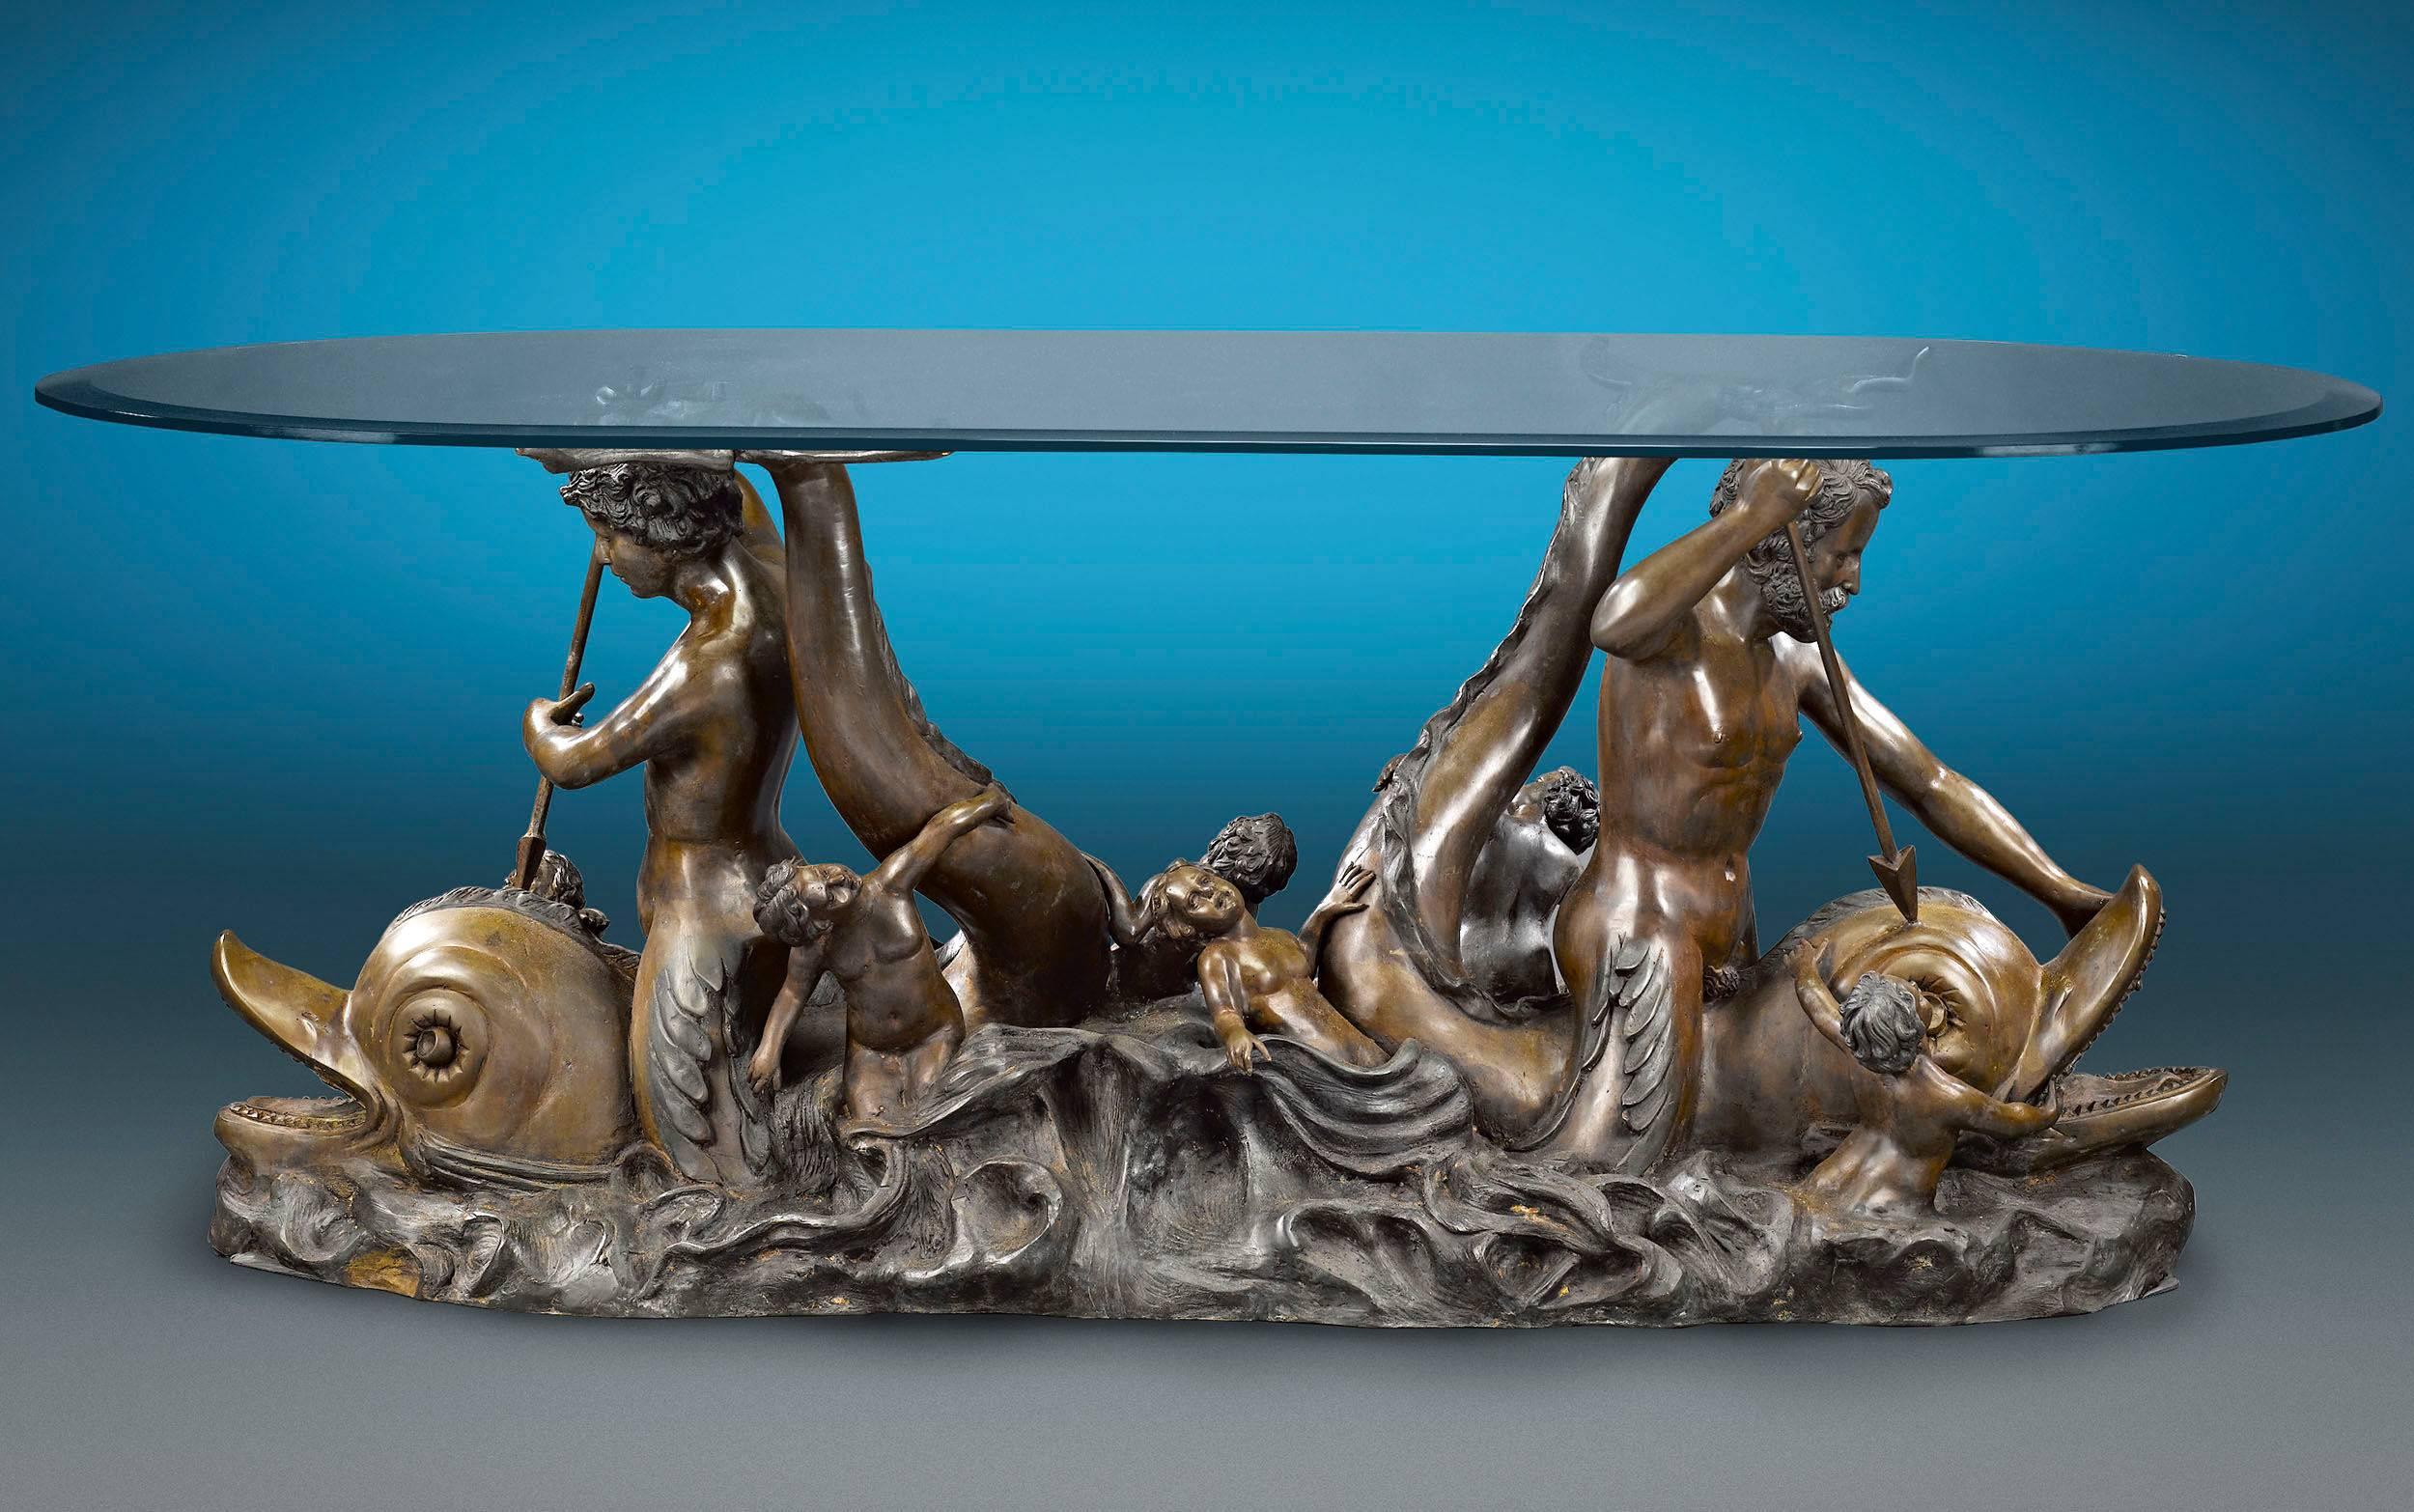 A merman and mermaid are astride a pair of dolphins in this incredible bronze sculptural table. As the merpeople spear their pray, they are joined by several putti enveloped by tumultuous waves. Its sleek glass top allows the opulent bronze to be